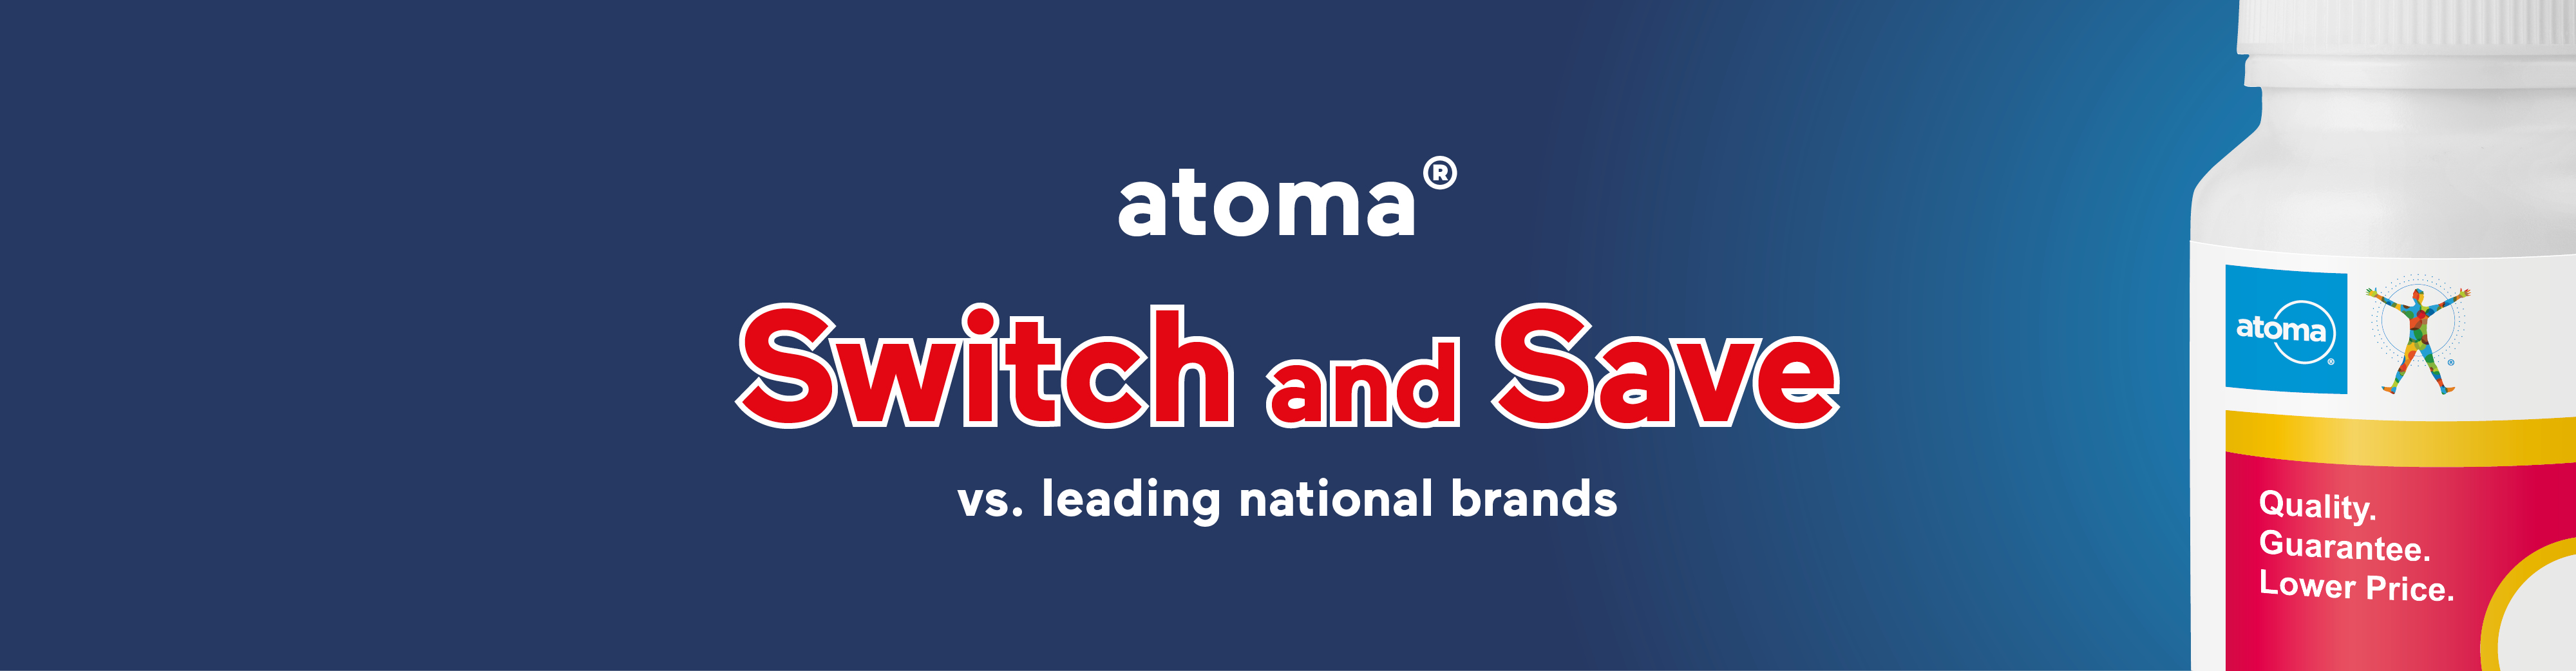 atoma Products